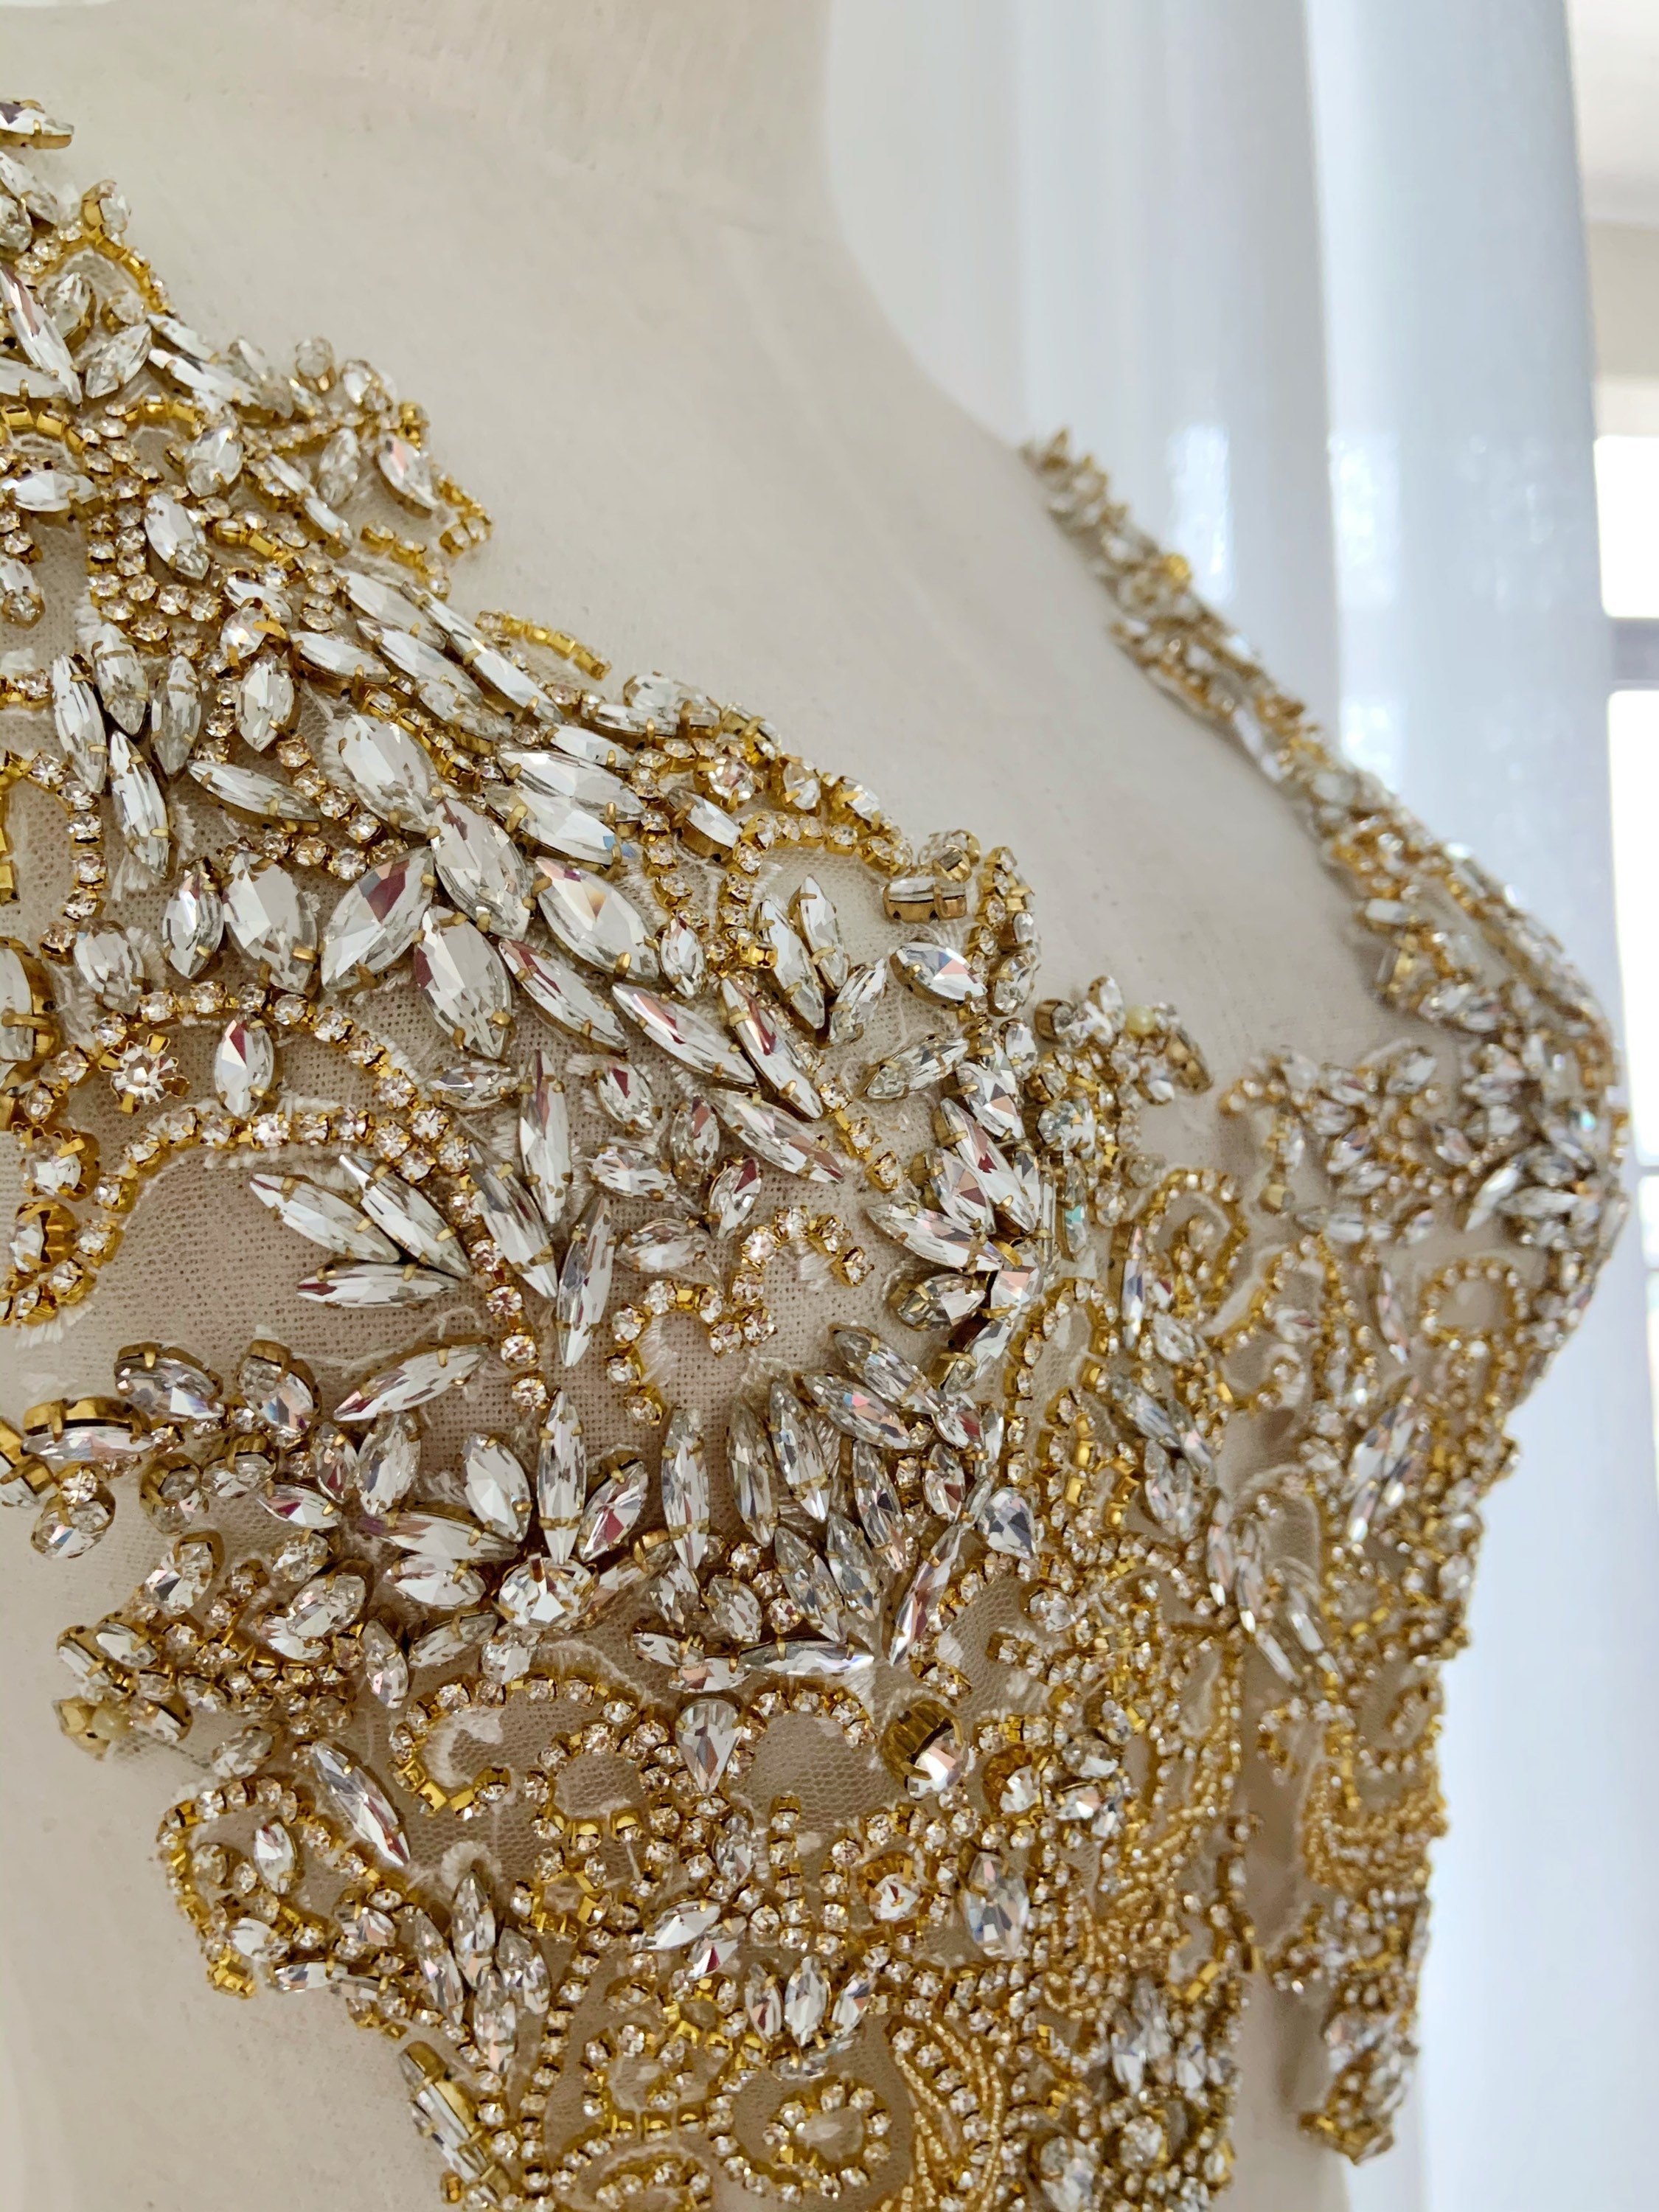 Gold Applique Lace, Bodice Applique, Gold Rhinestone Pearl Belt, Gold Trim Beaded, Gold Lace Fabric Gold Tulle for Dress (c1b Gold)